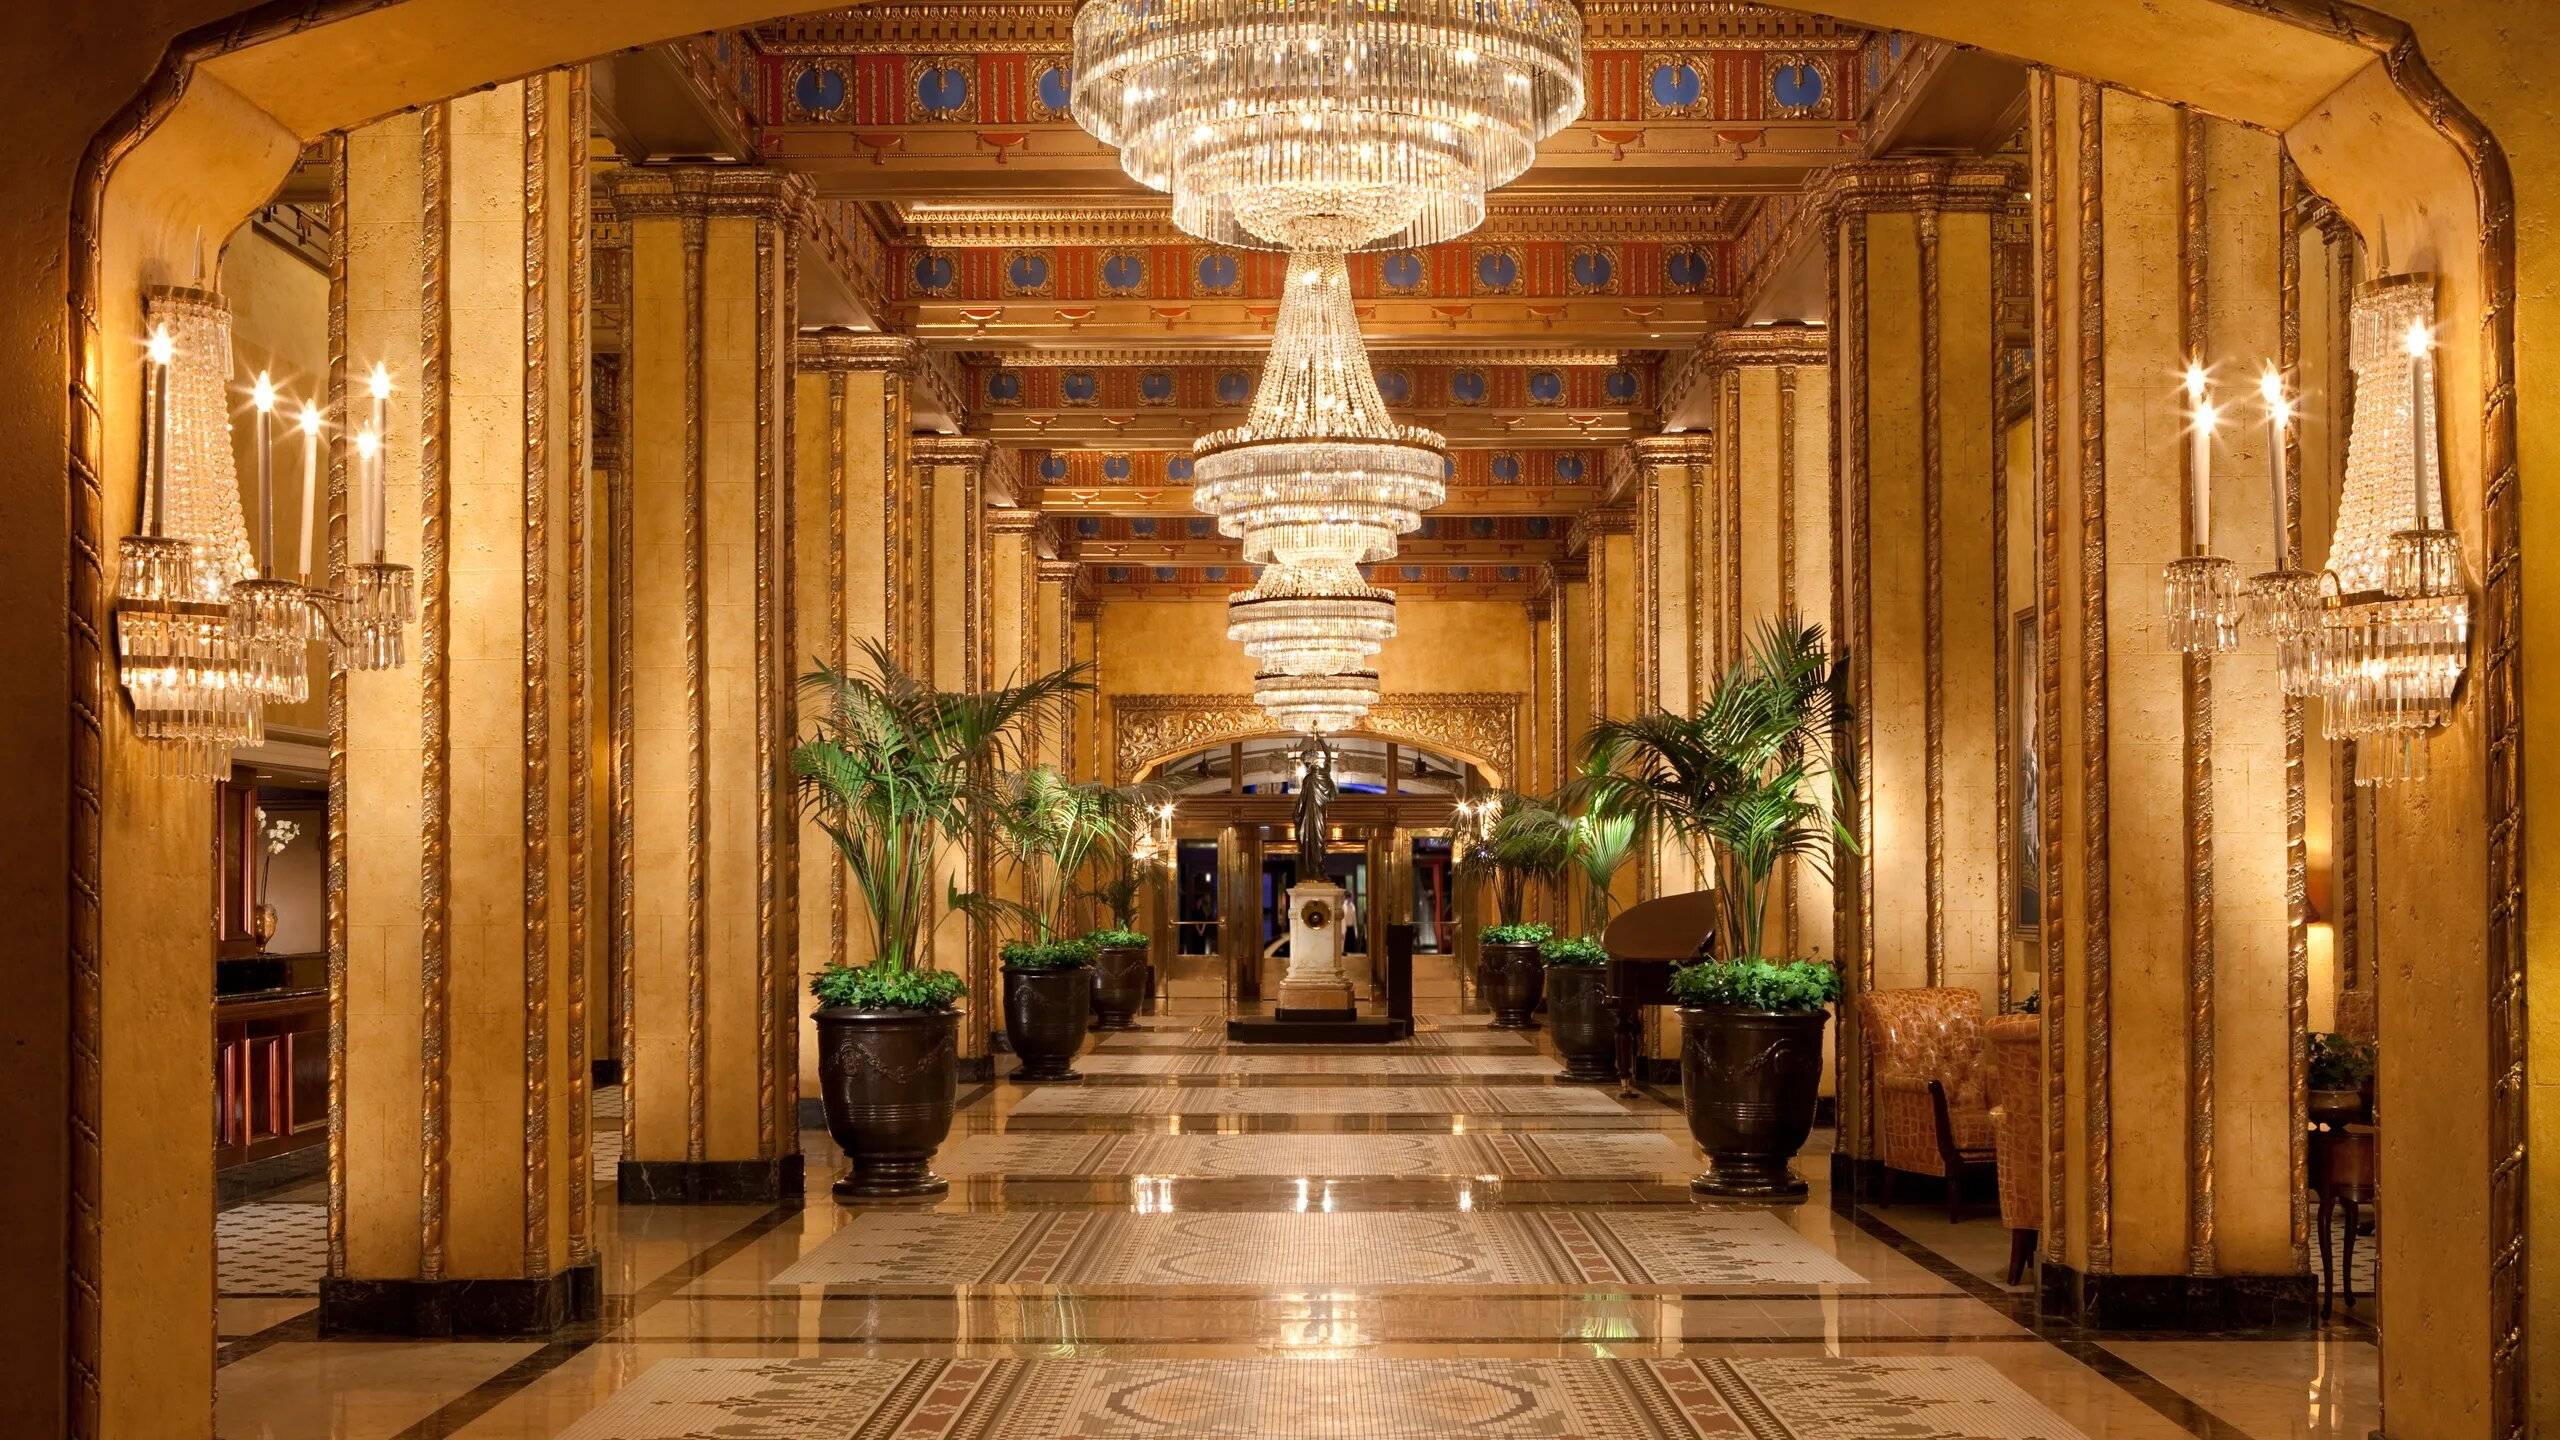 The Roosevelt Hotel New Orleans, 1893: A Timeless Emblem of Luxury and History